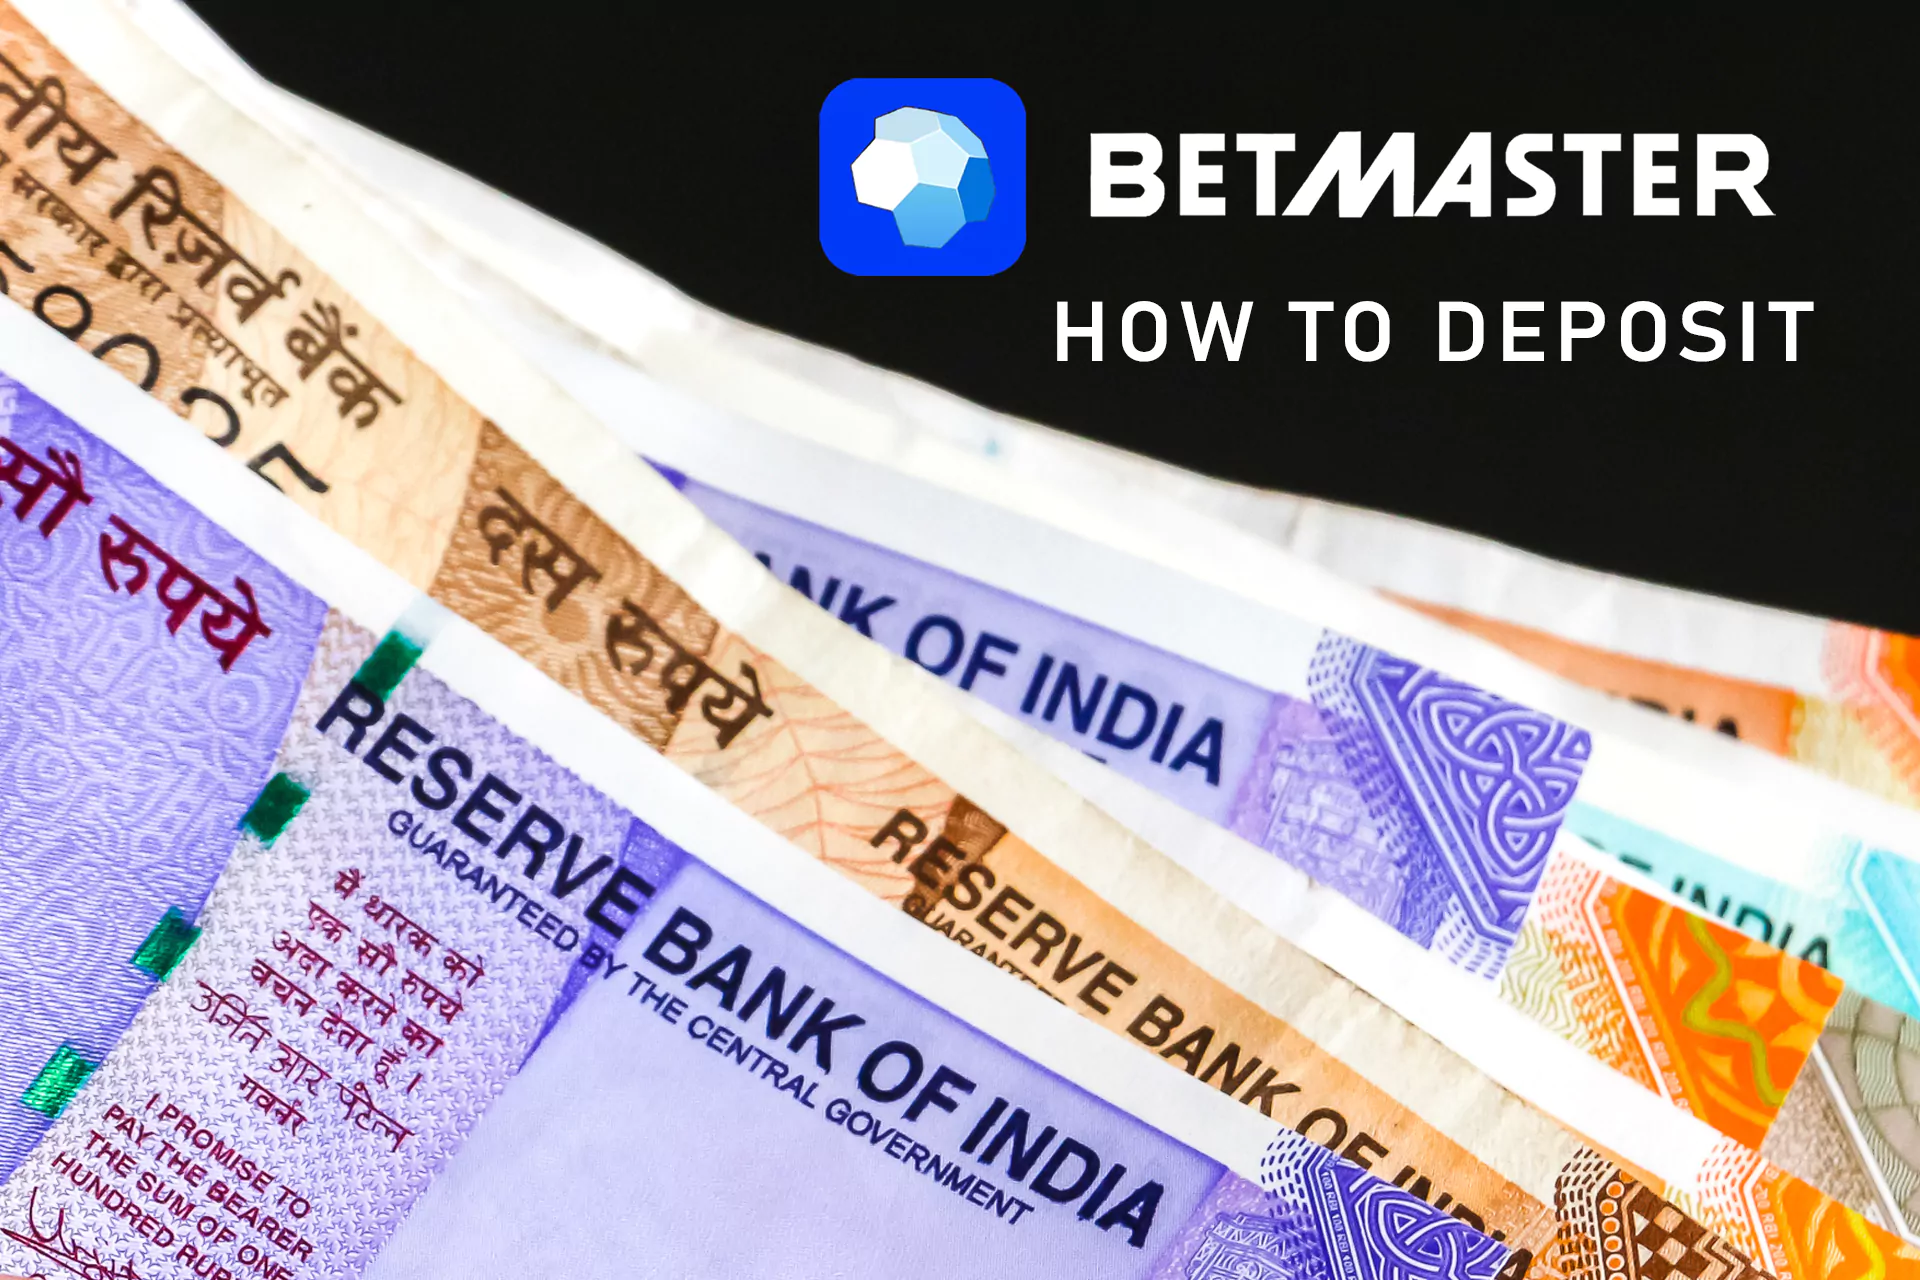 The next step after registration and verification is topping up your betting account.